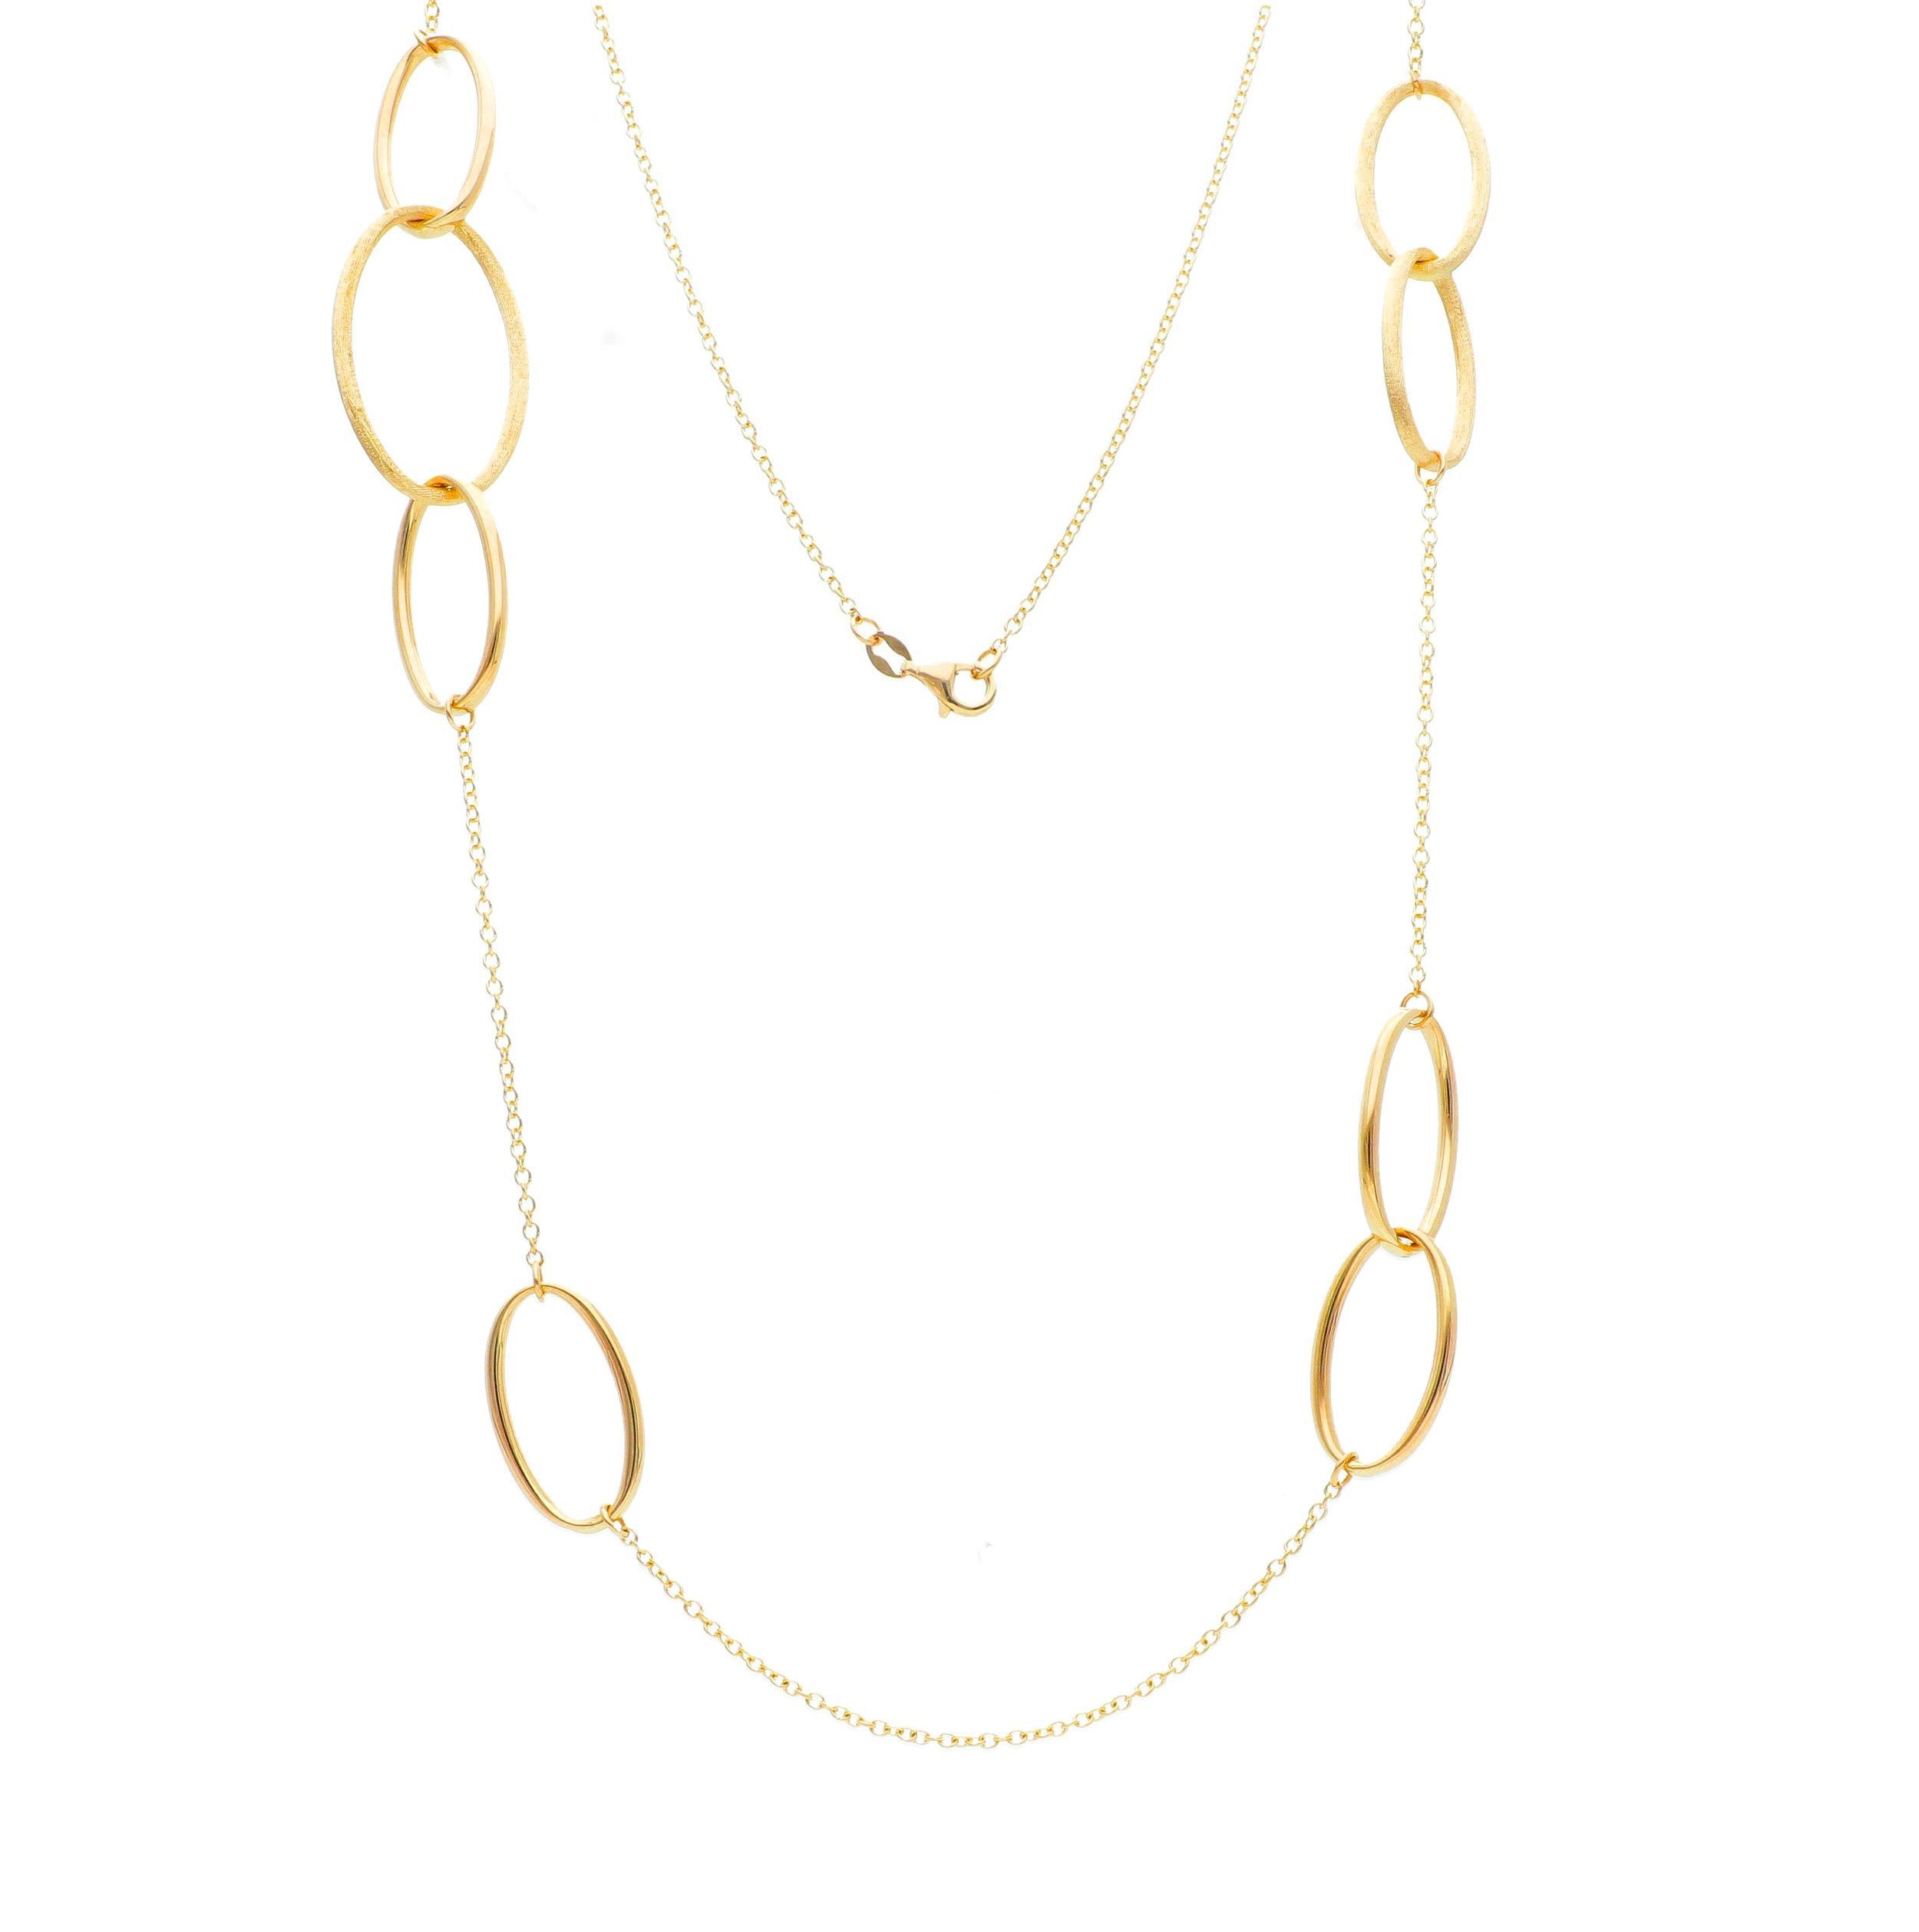 Golden necklace k14 with golden rings  (code S246029)